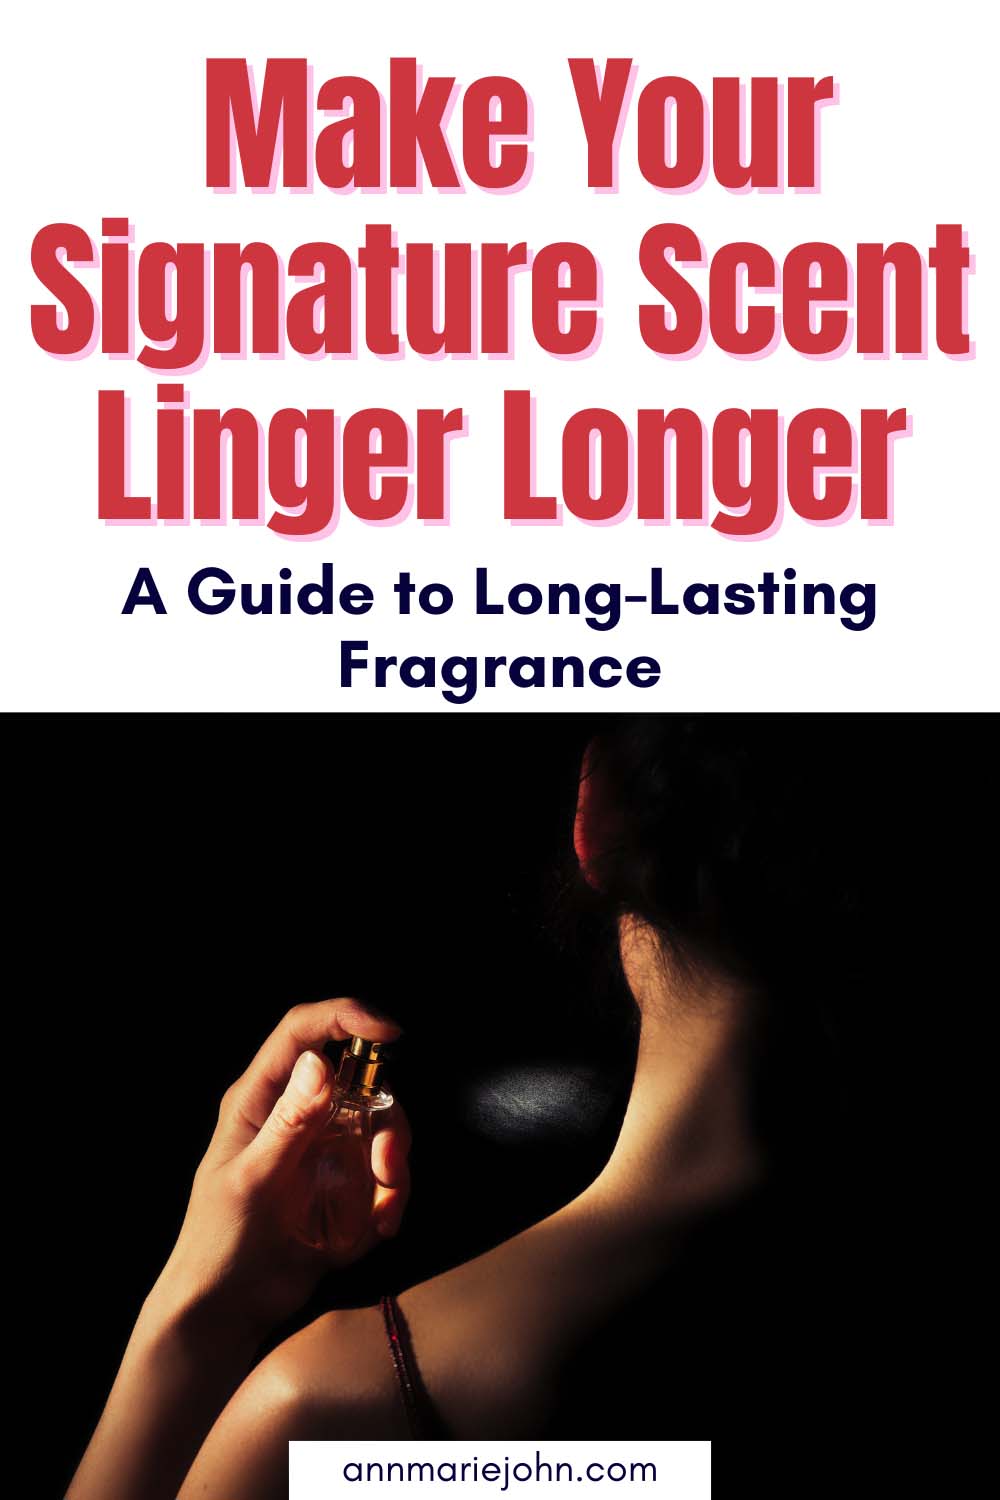 Make Your Signature Scent Linger Longer: A Guide to Long-Lasting Fragrance